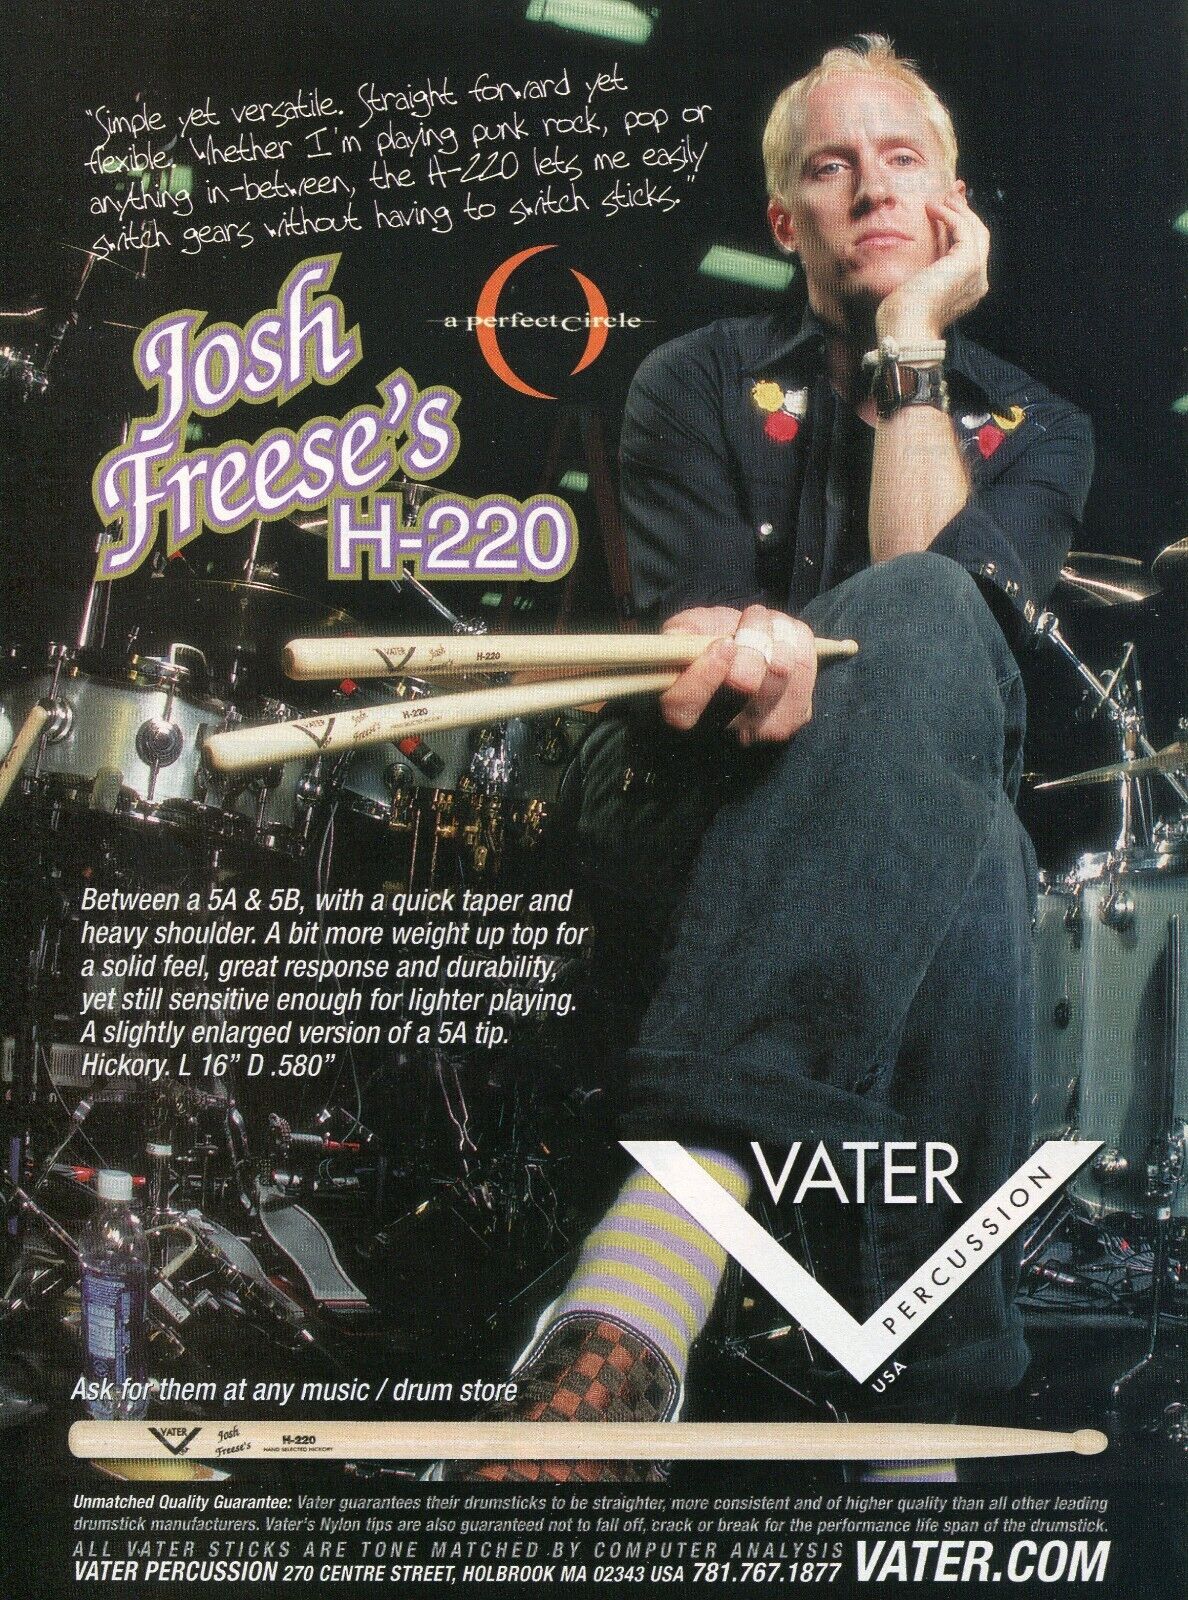 2007 Print Ad of Vater H-220 Drumsticks w Josh Freese A Perfect Circle